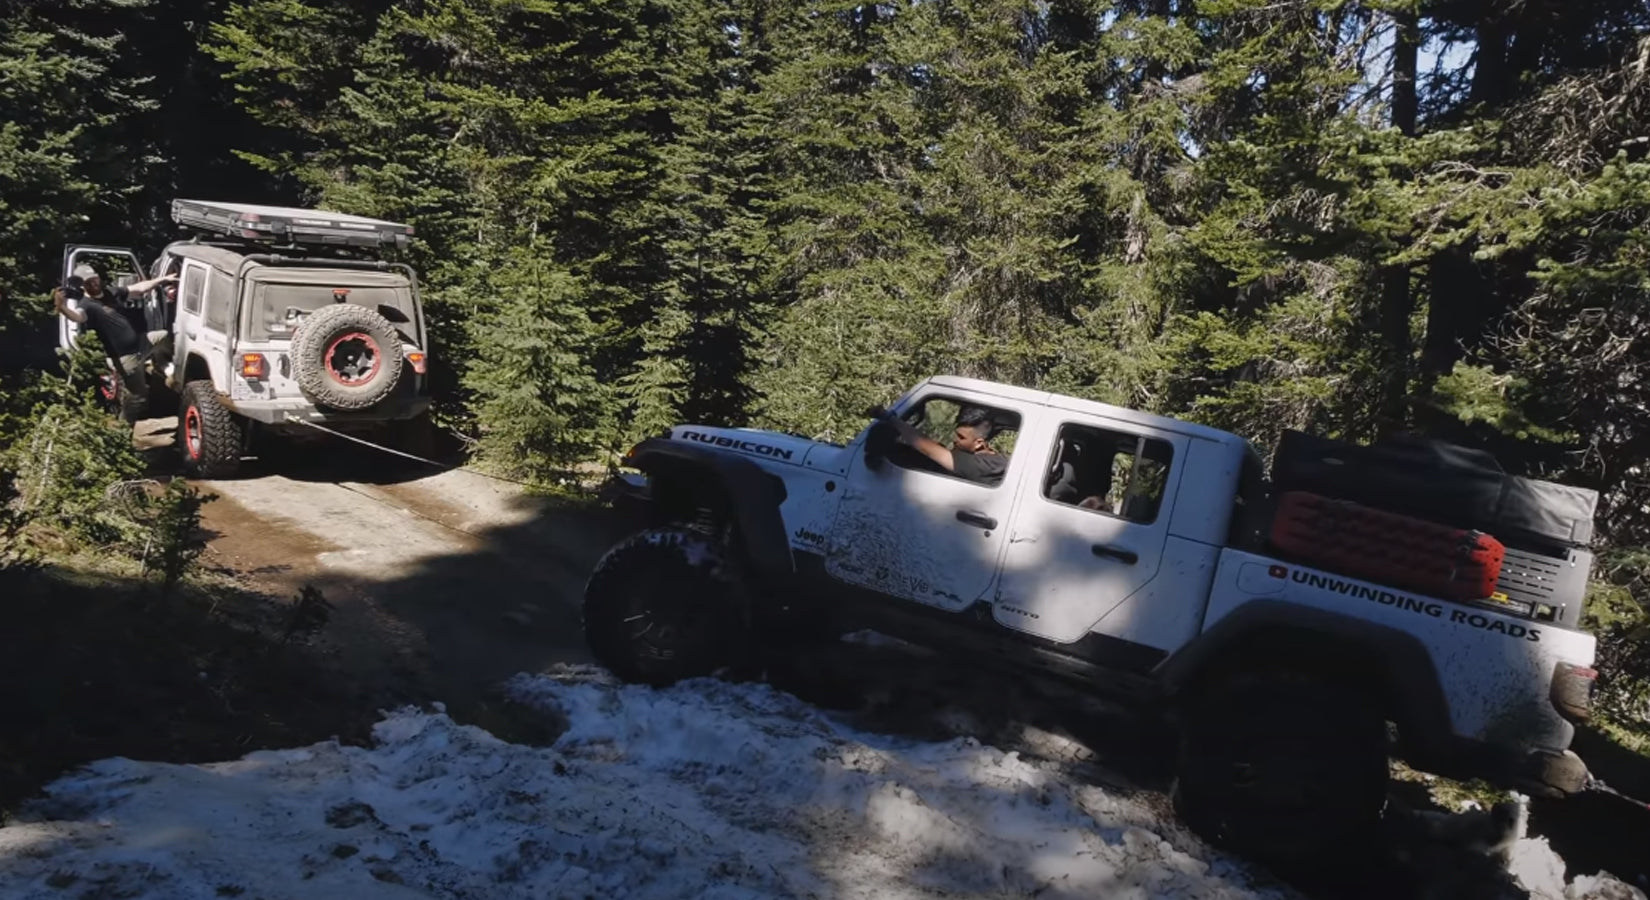 I Sunk my Jeep! Overlanding is Dangerous - @TheStoryTillNow